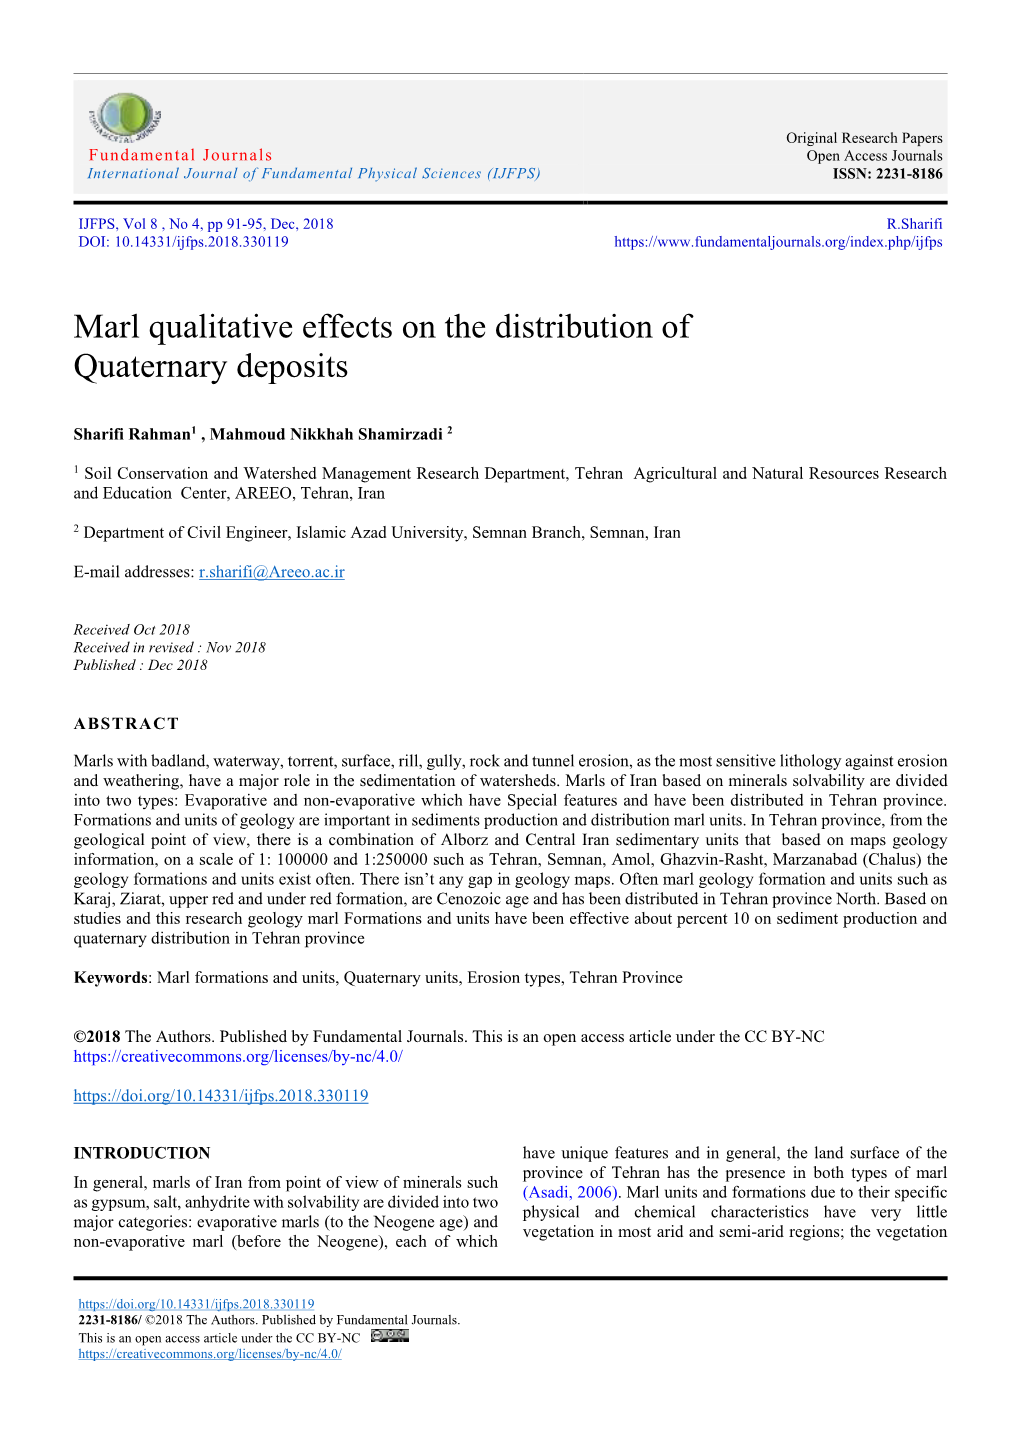 Marl Qualitative Effects on the Distribution of Quaternary Deposits